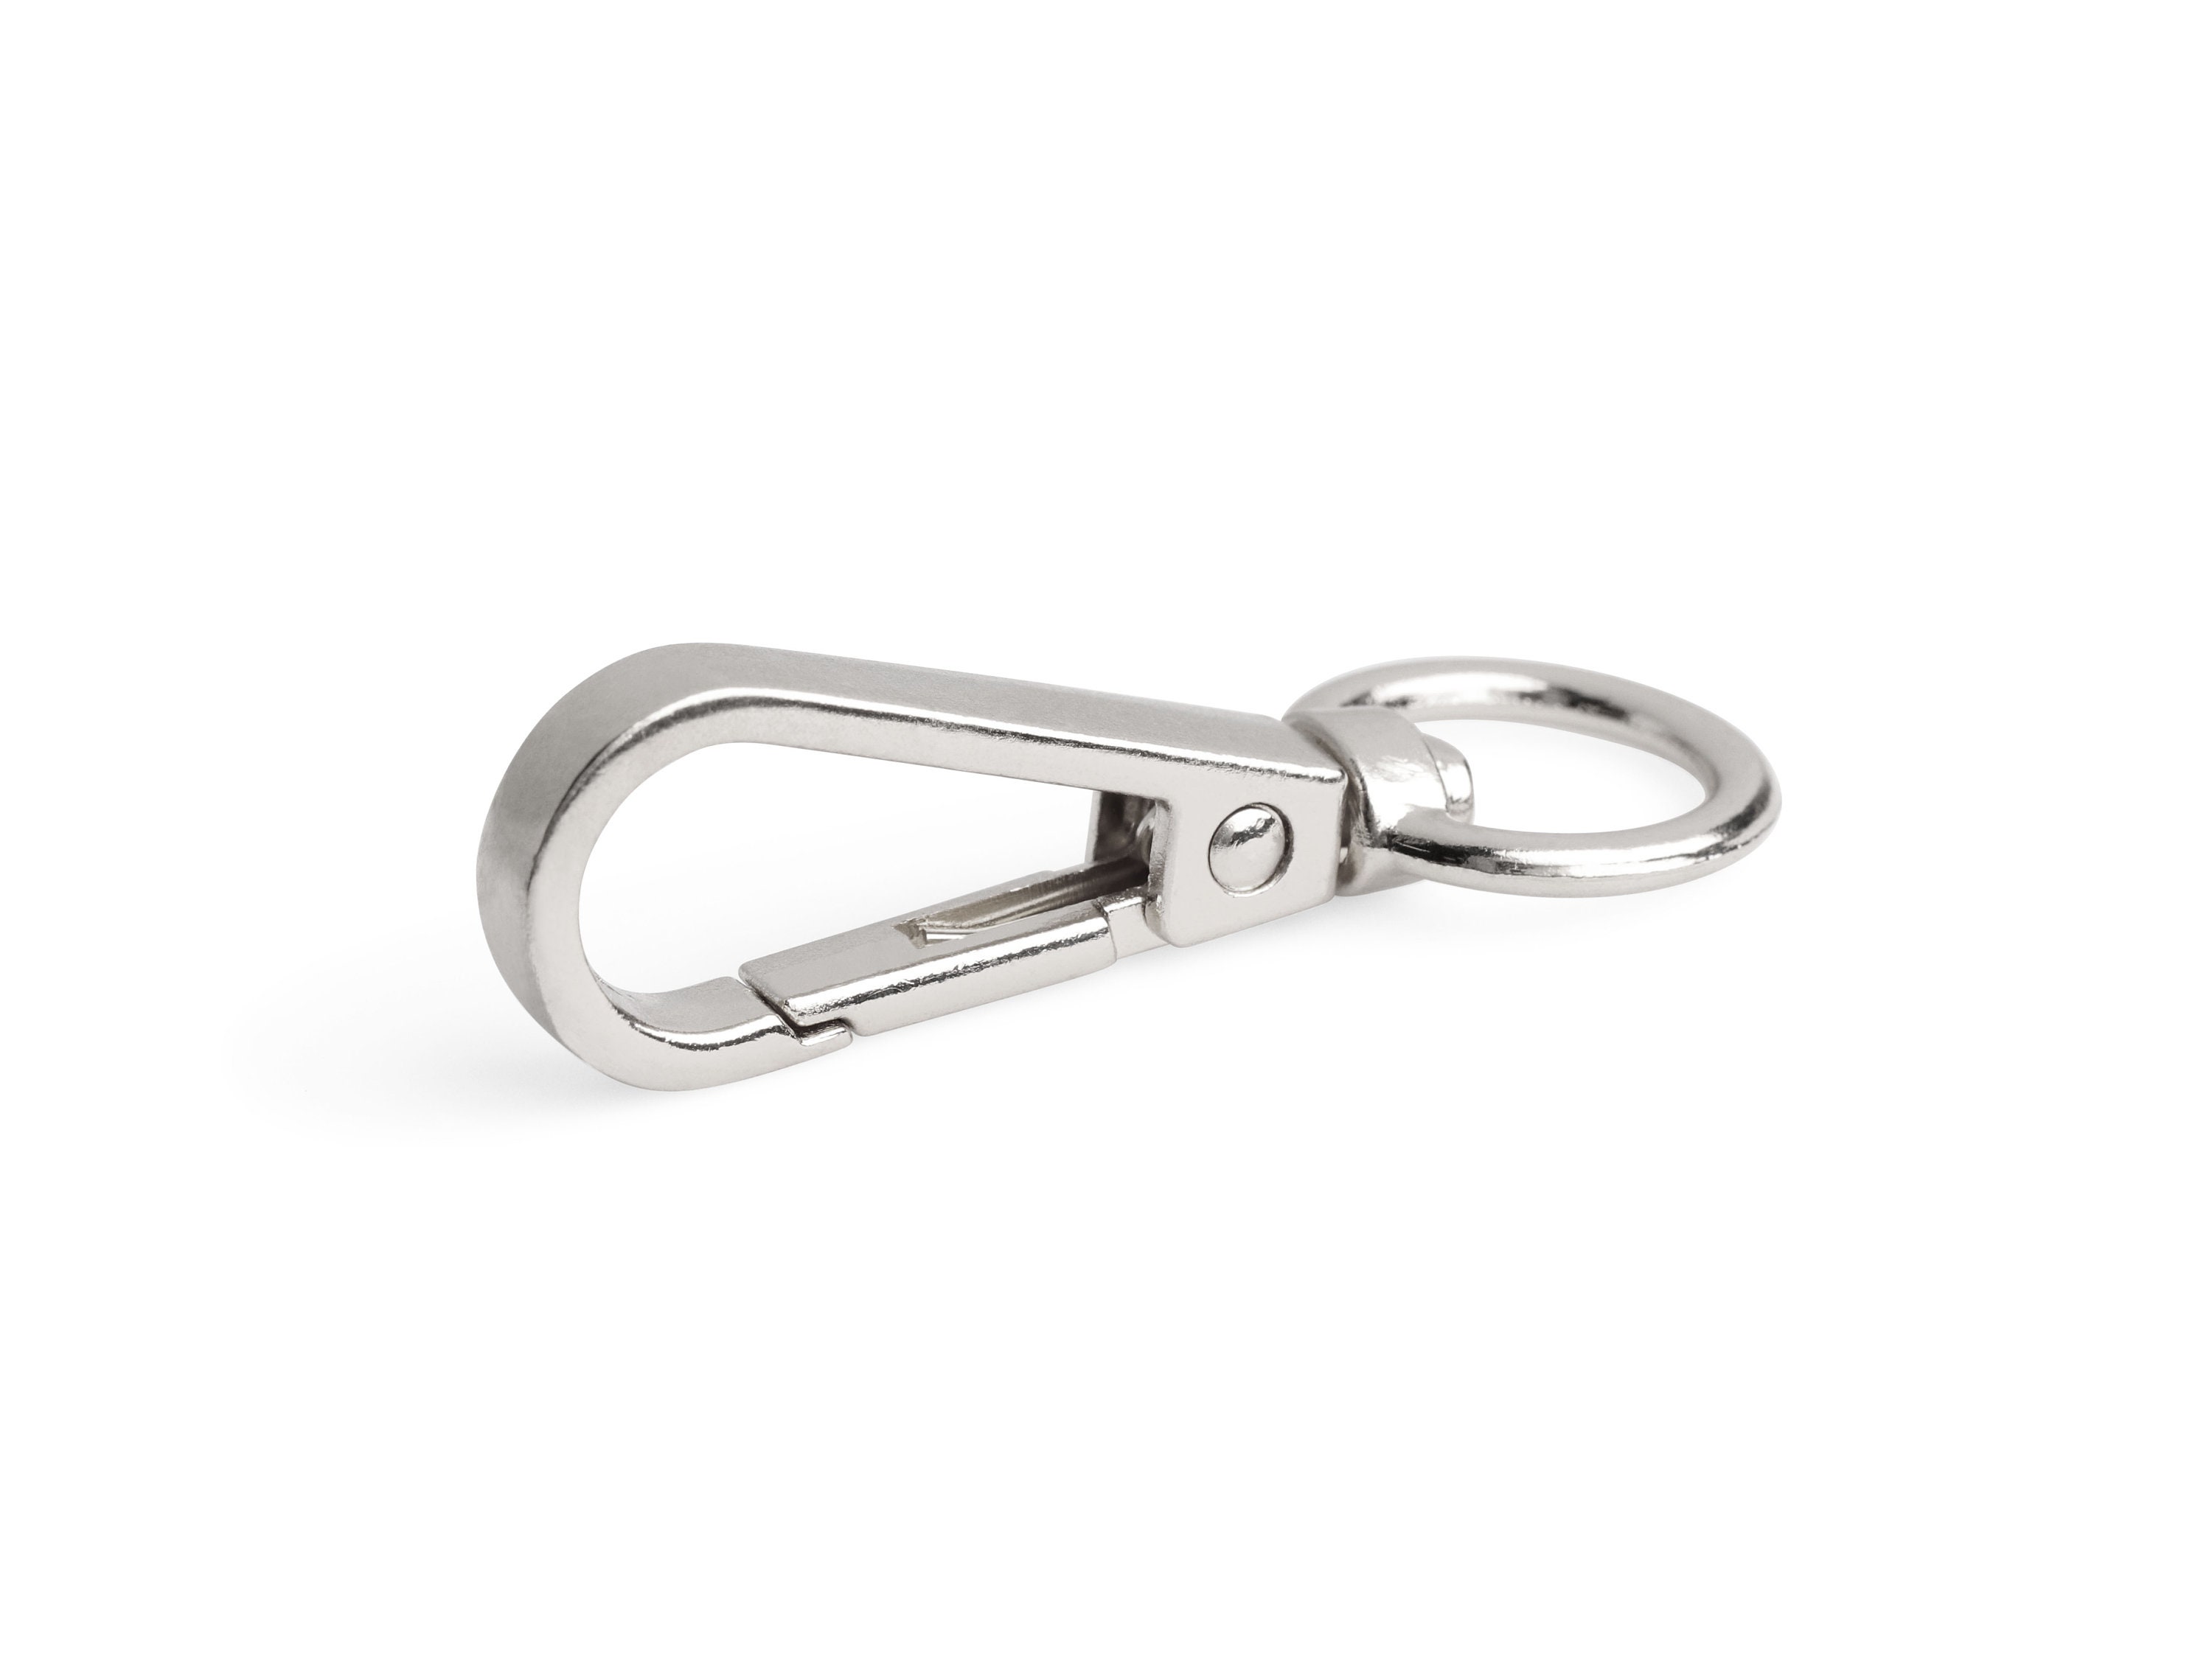 2 Small Silver Snap Hooks with Swivel, 1.3 Inch, Metal, Replacement Cl